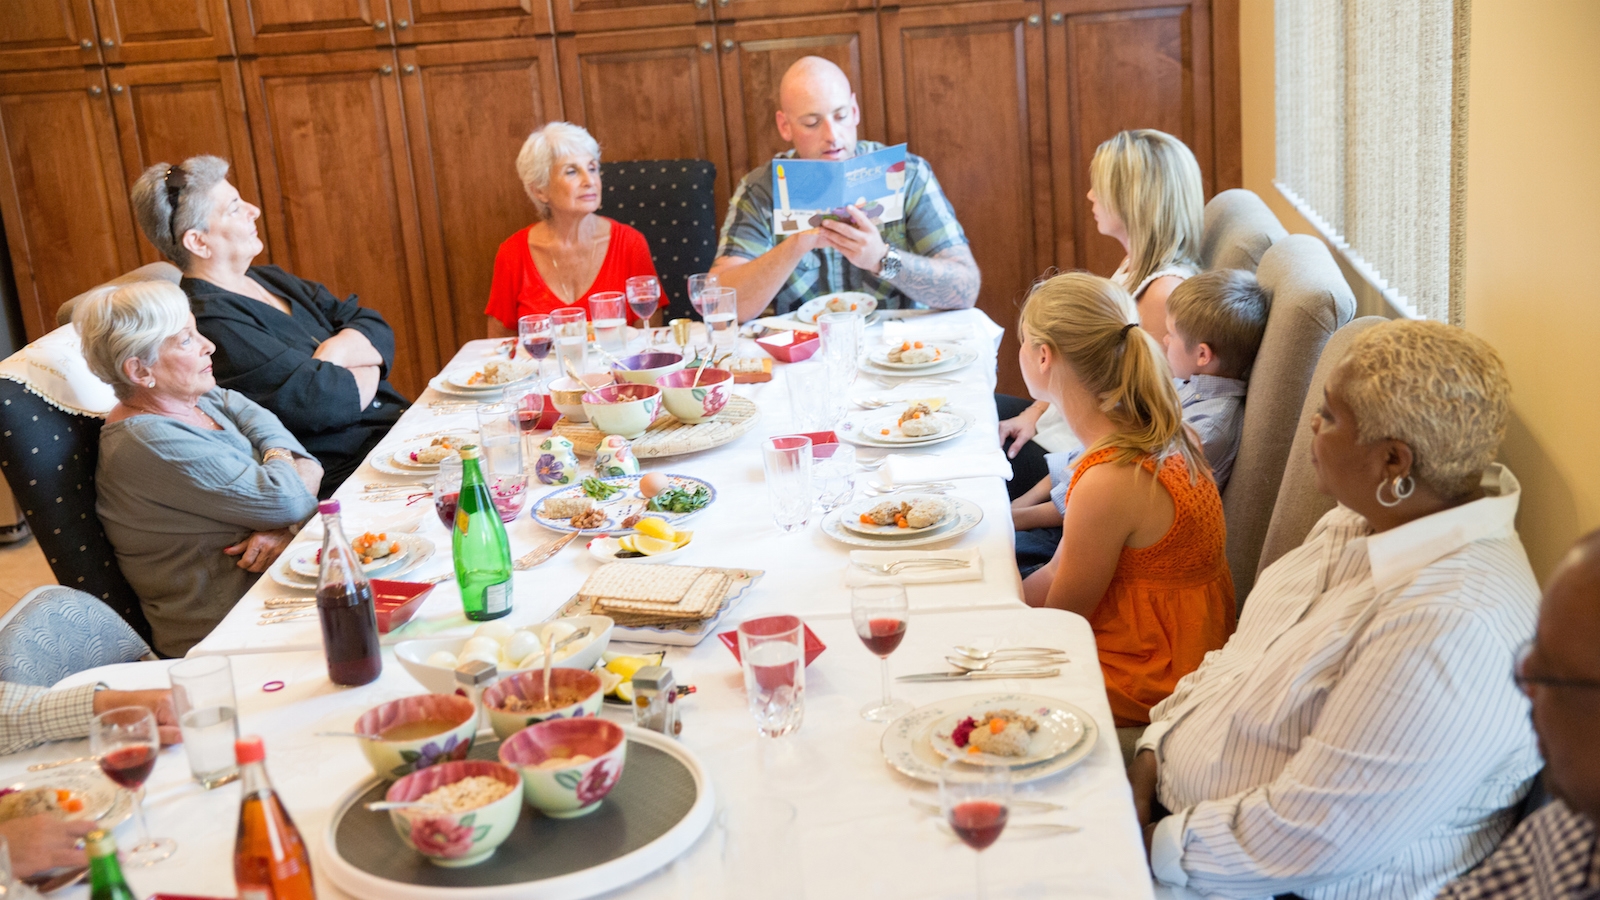 A family gathers for a Passover seder featuring many of the traditional Passover foods, like charoset, eggs and matzah. A man reads from a Haggadah.